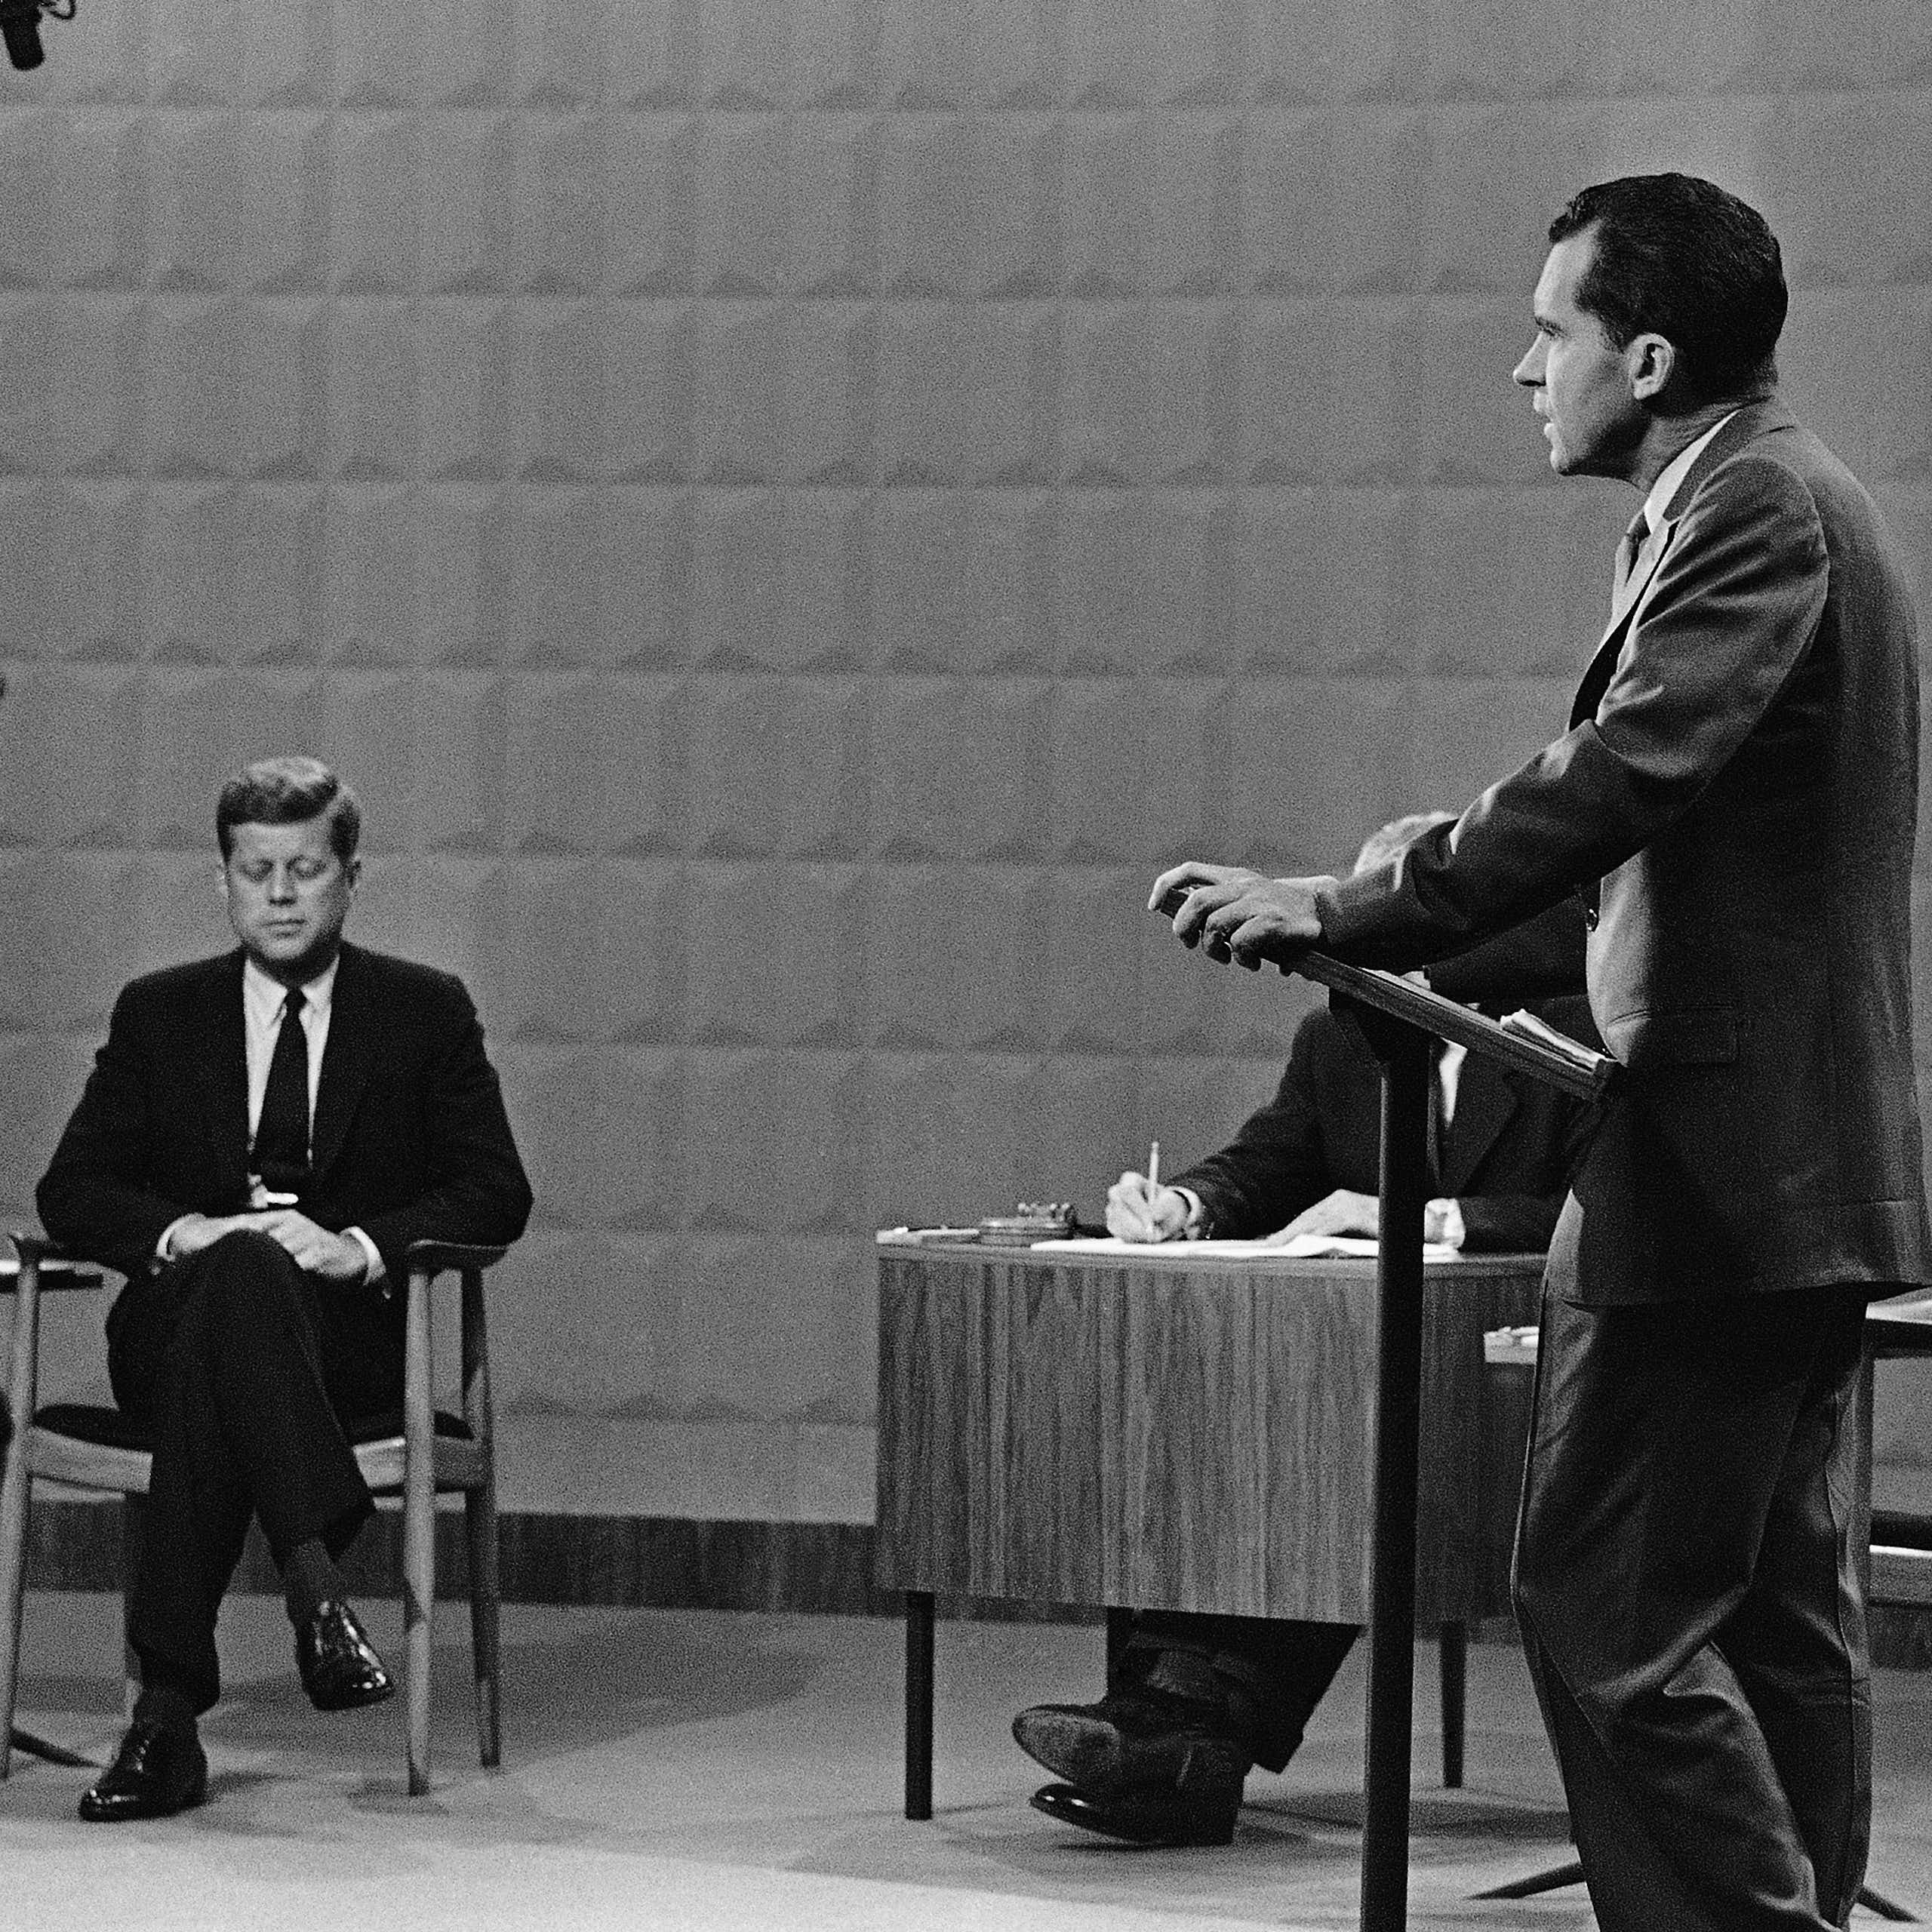 A black and white photo shows a man sitting down in a dark suit while another man stands at a lectern nearby him.